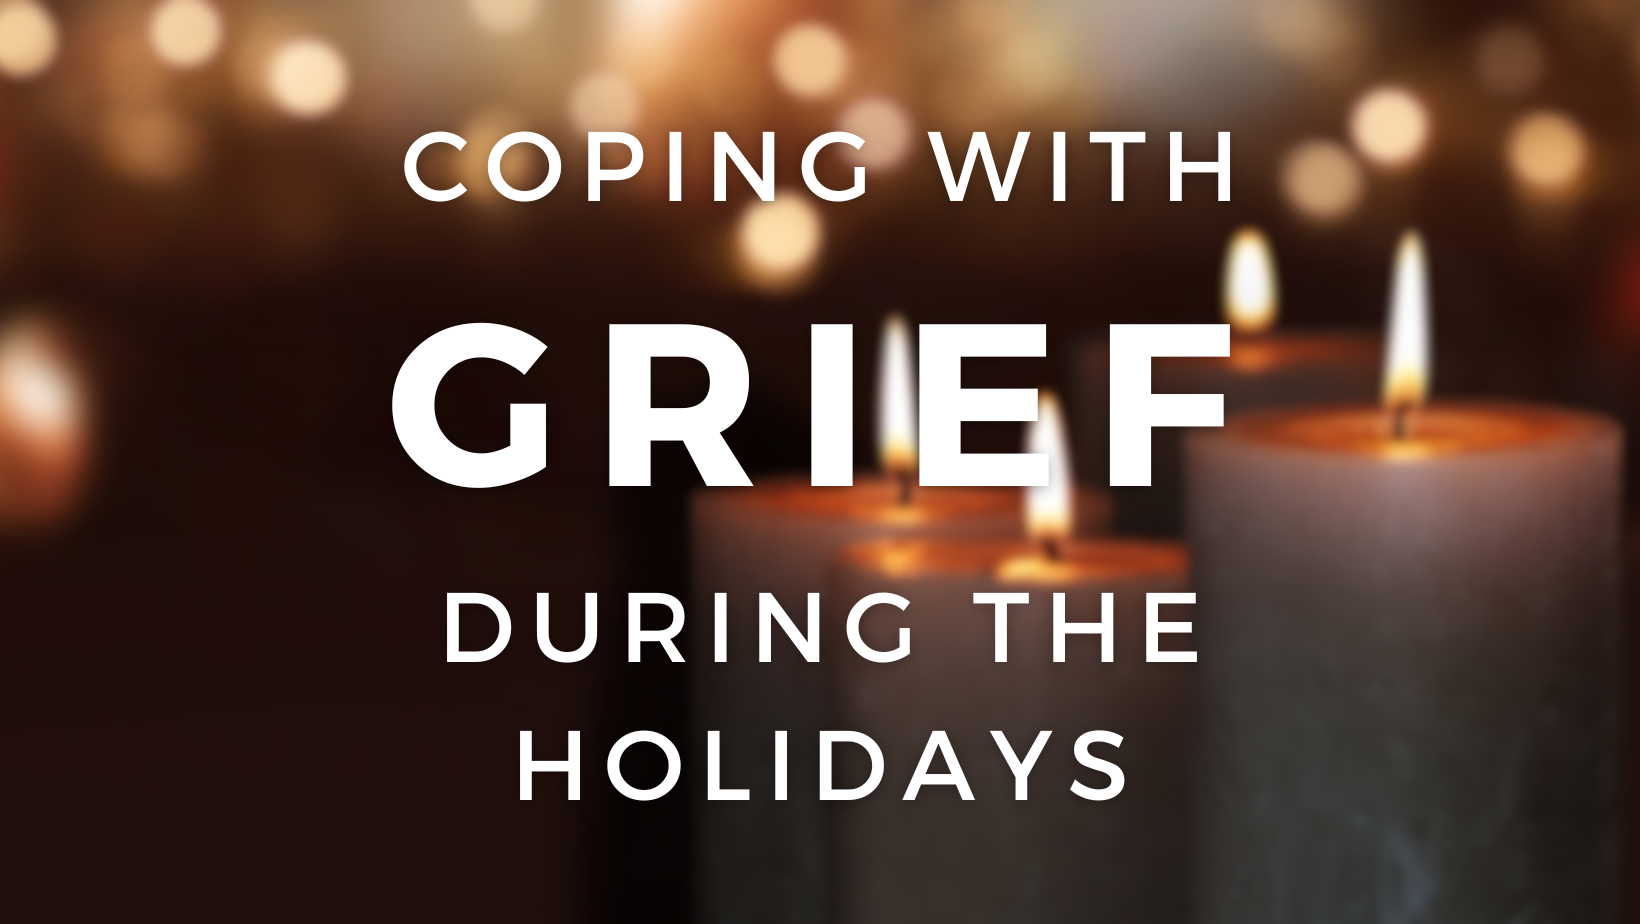 caregivers and coping with grief during the holidays